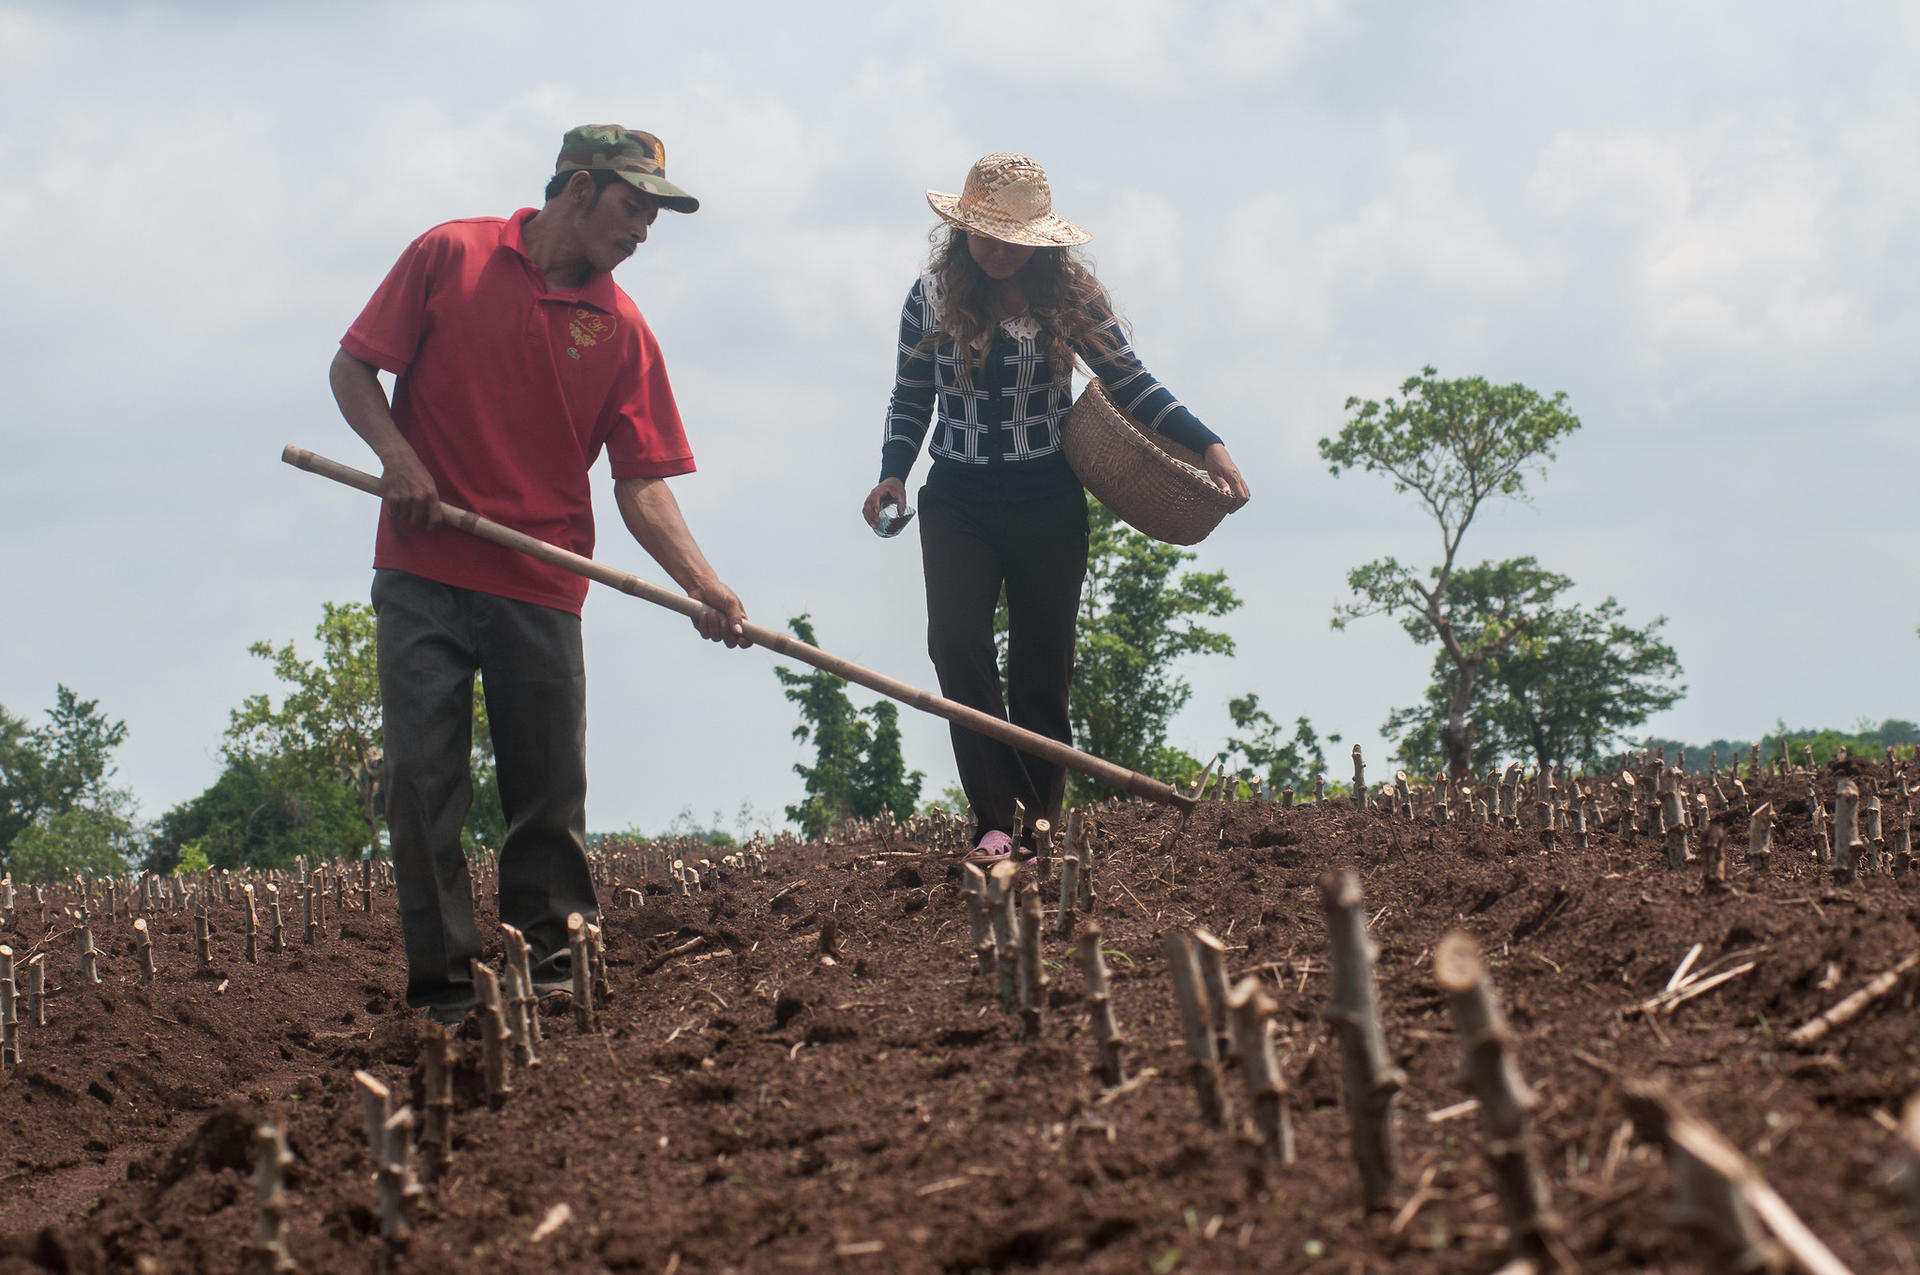 Using a hoe to dig small holes for fertilizer. Communities in Kampong Cham province, Cambodia,have been taught more sustainable planting methods to improve cassava production. ©2015CIAT/GeorginaSmith